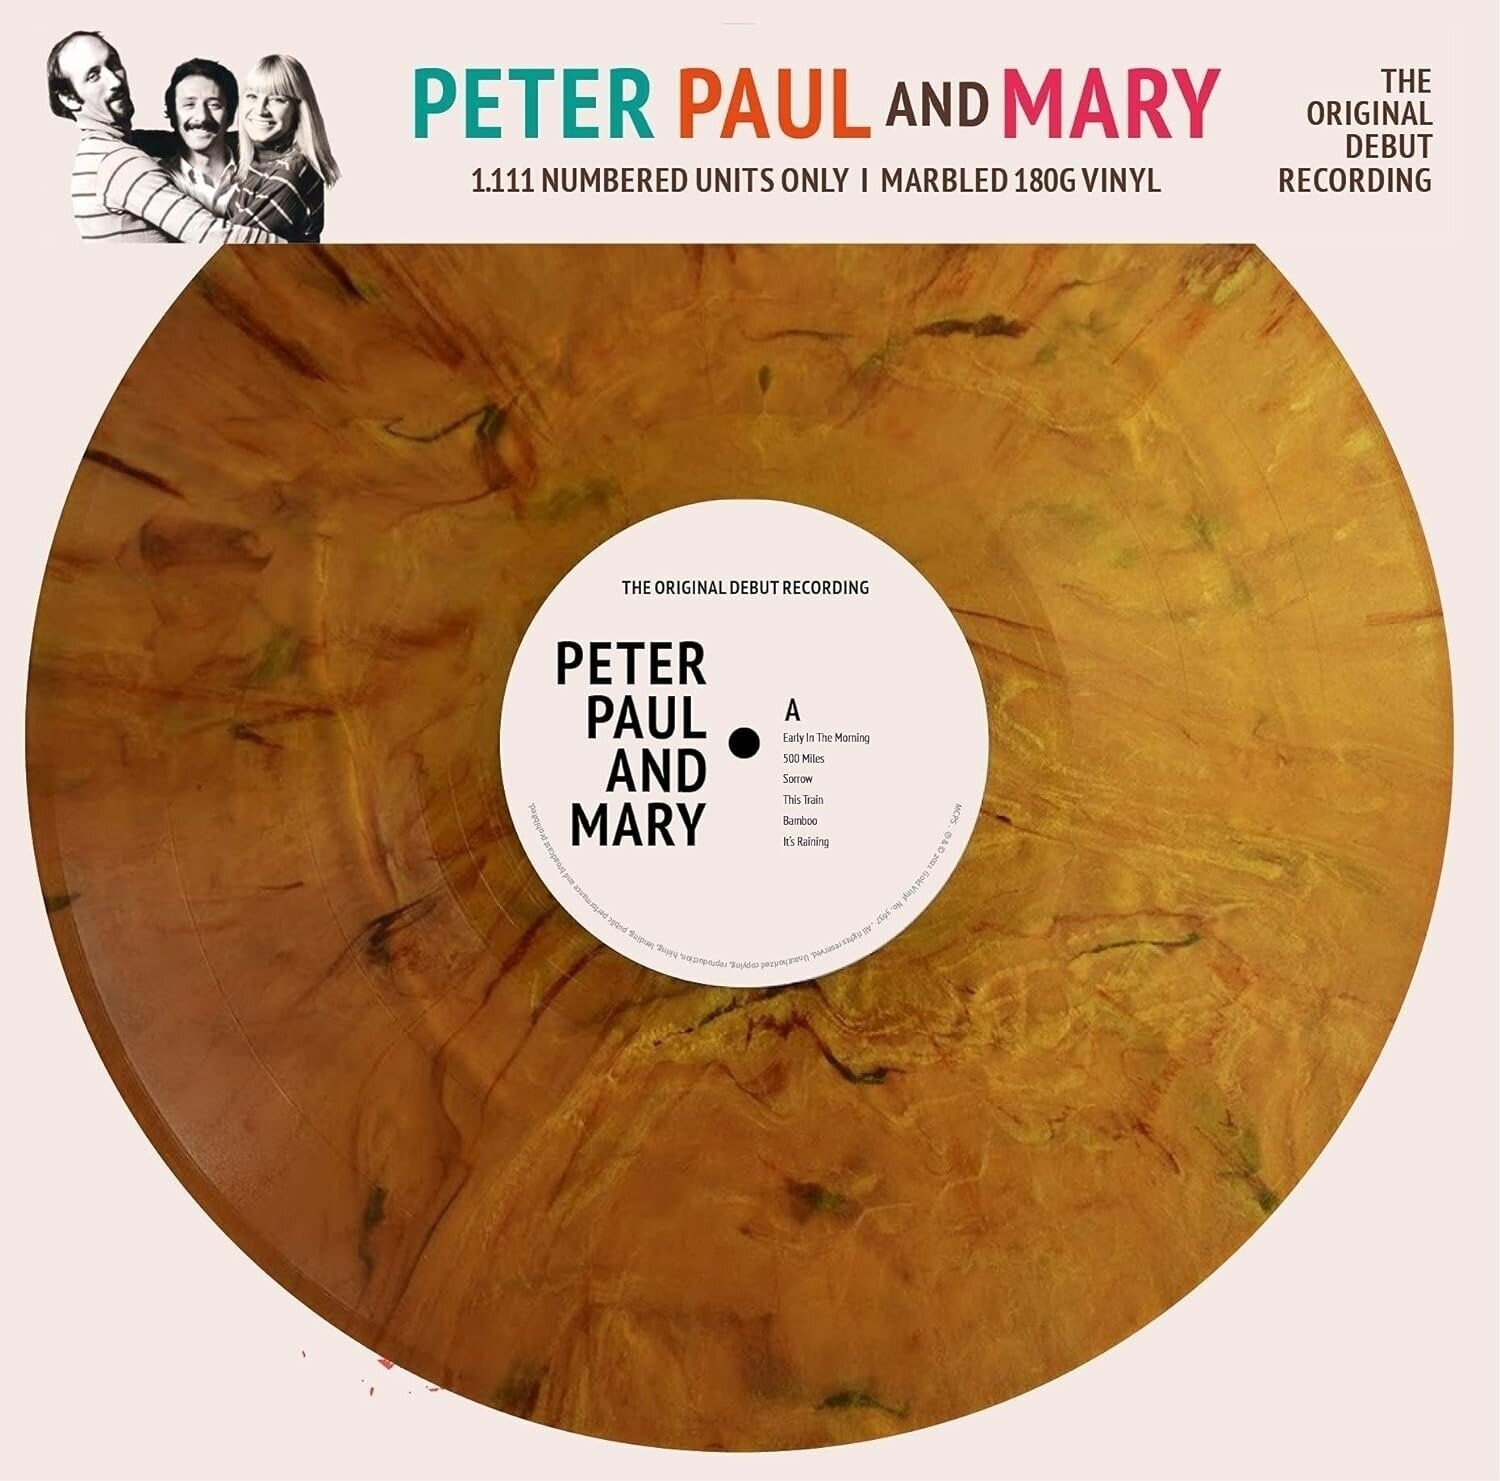 LP deska Peter, Paul and Mary - The Original Debut Recording (Limited Edition) (Numbered) (Gold Marbled Coloured) (LP)